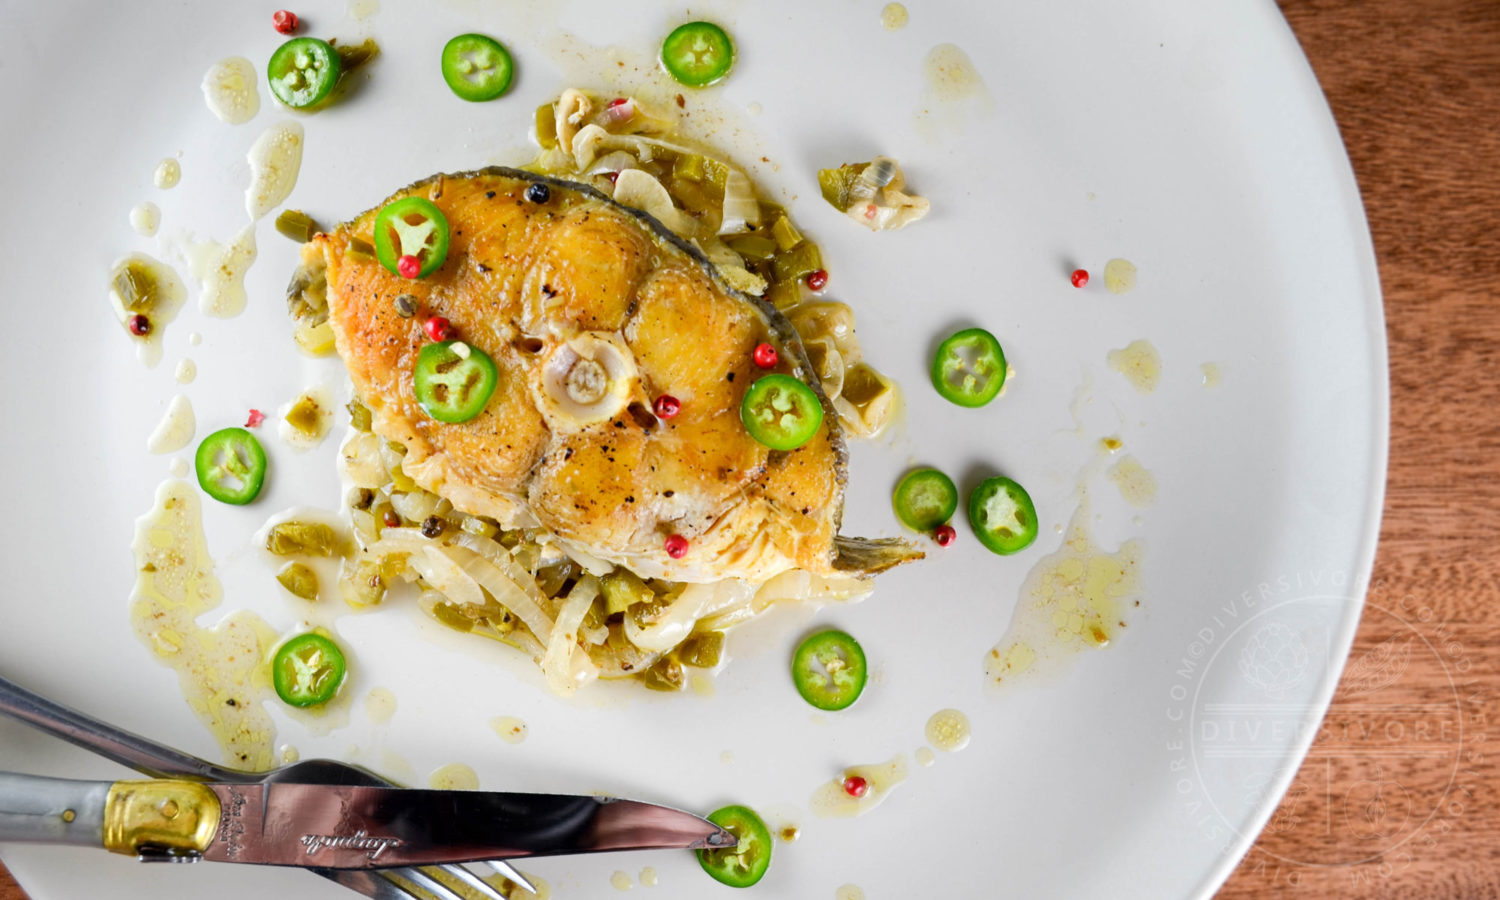 Halibut escabeche - cooked and marinated with olive oil, vinegar, garlic and jalapenos - Diversivore.com